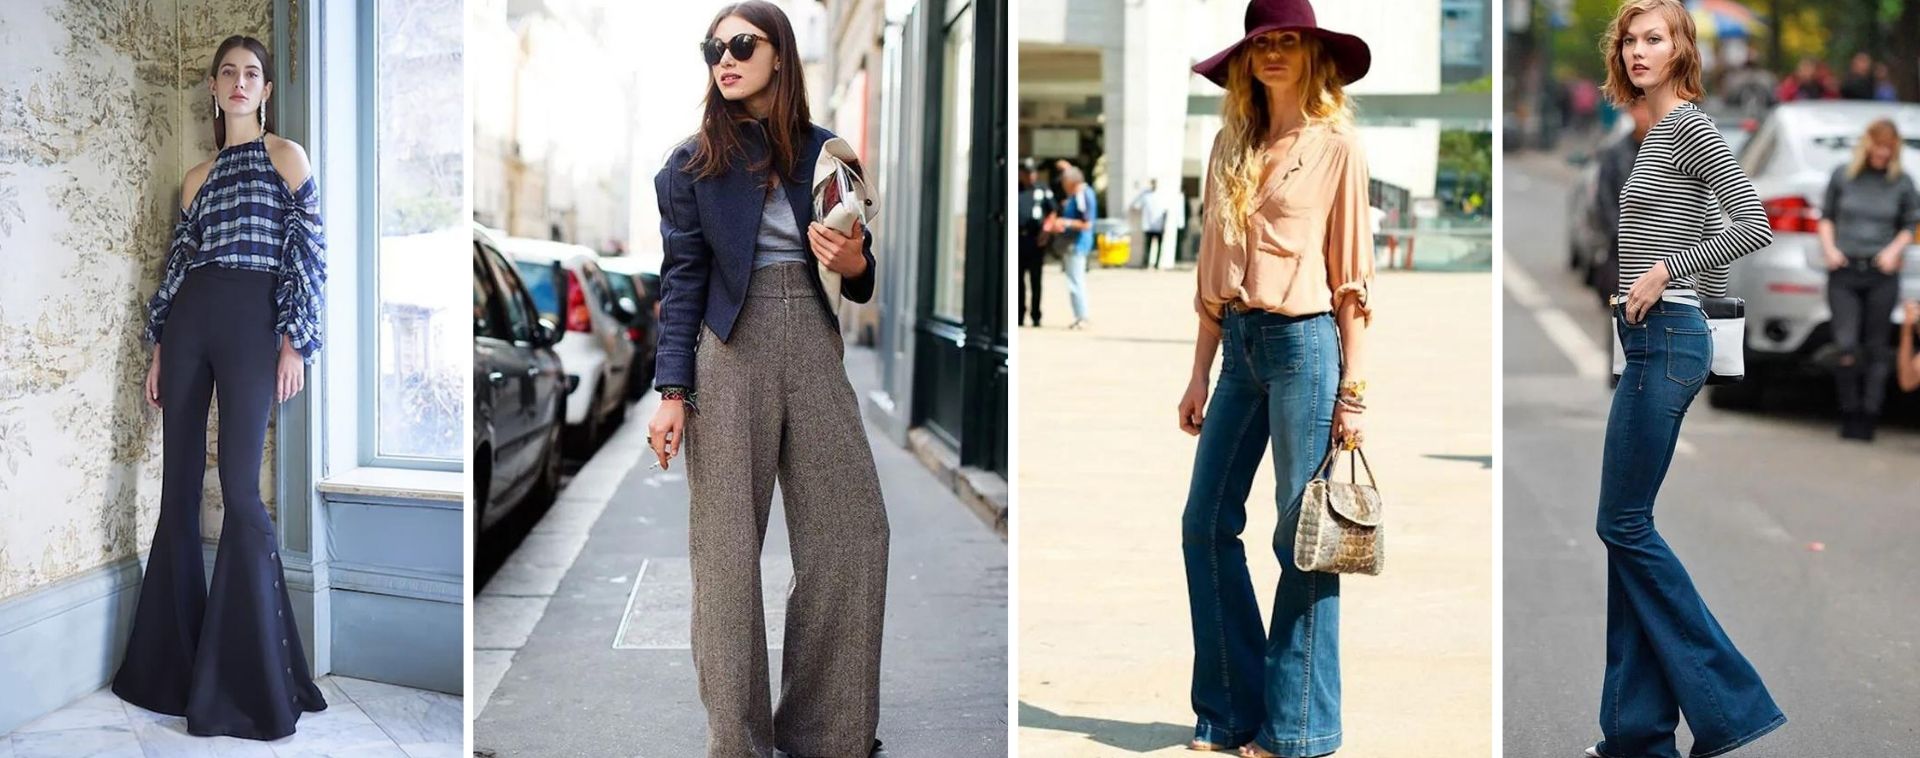 WHAT TO WEAR WITH BOHO FLARE PANTS OUTFIT IDEAS LOOK BOOK